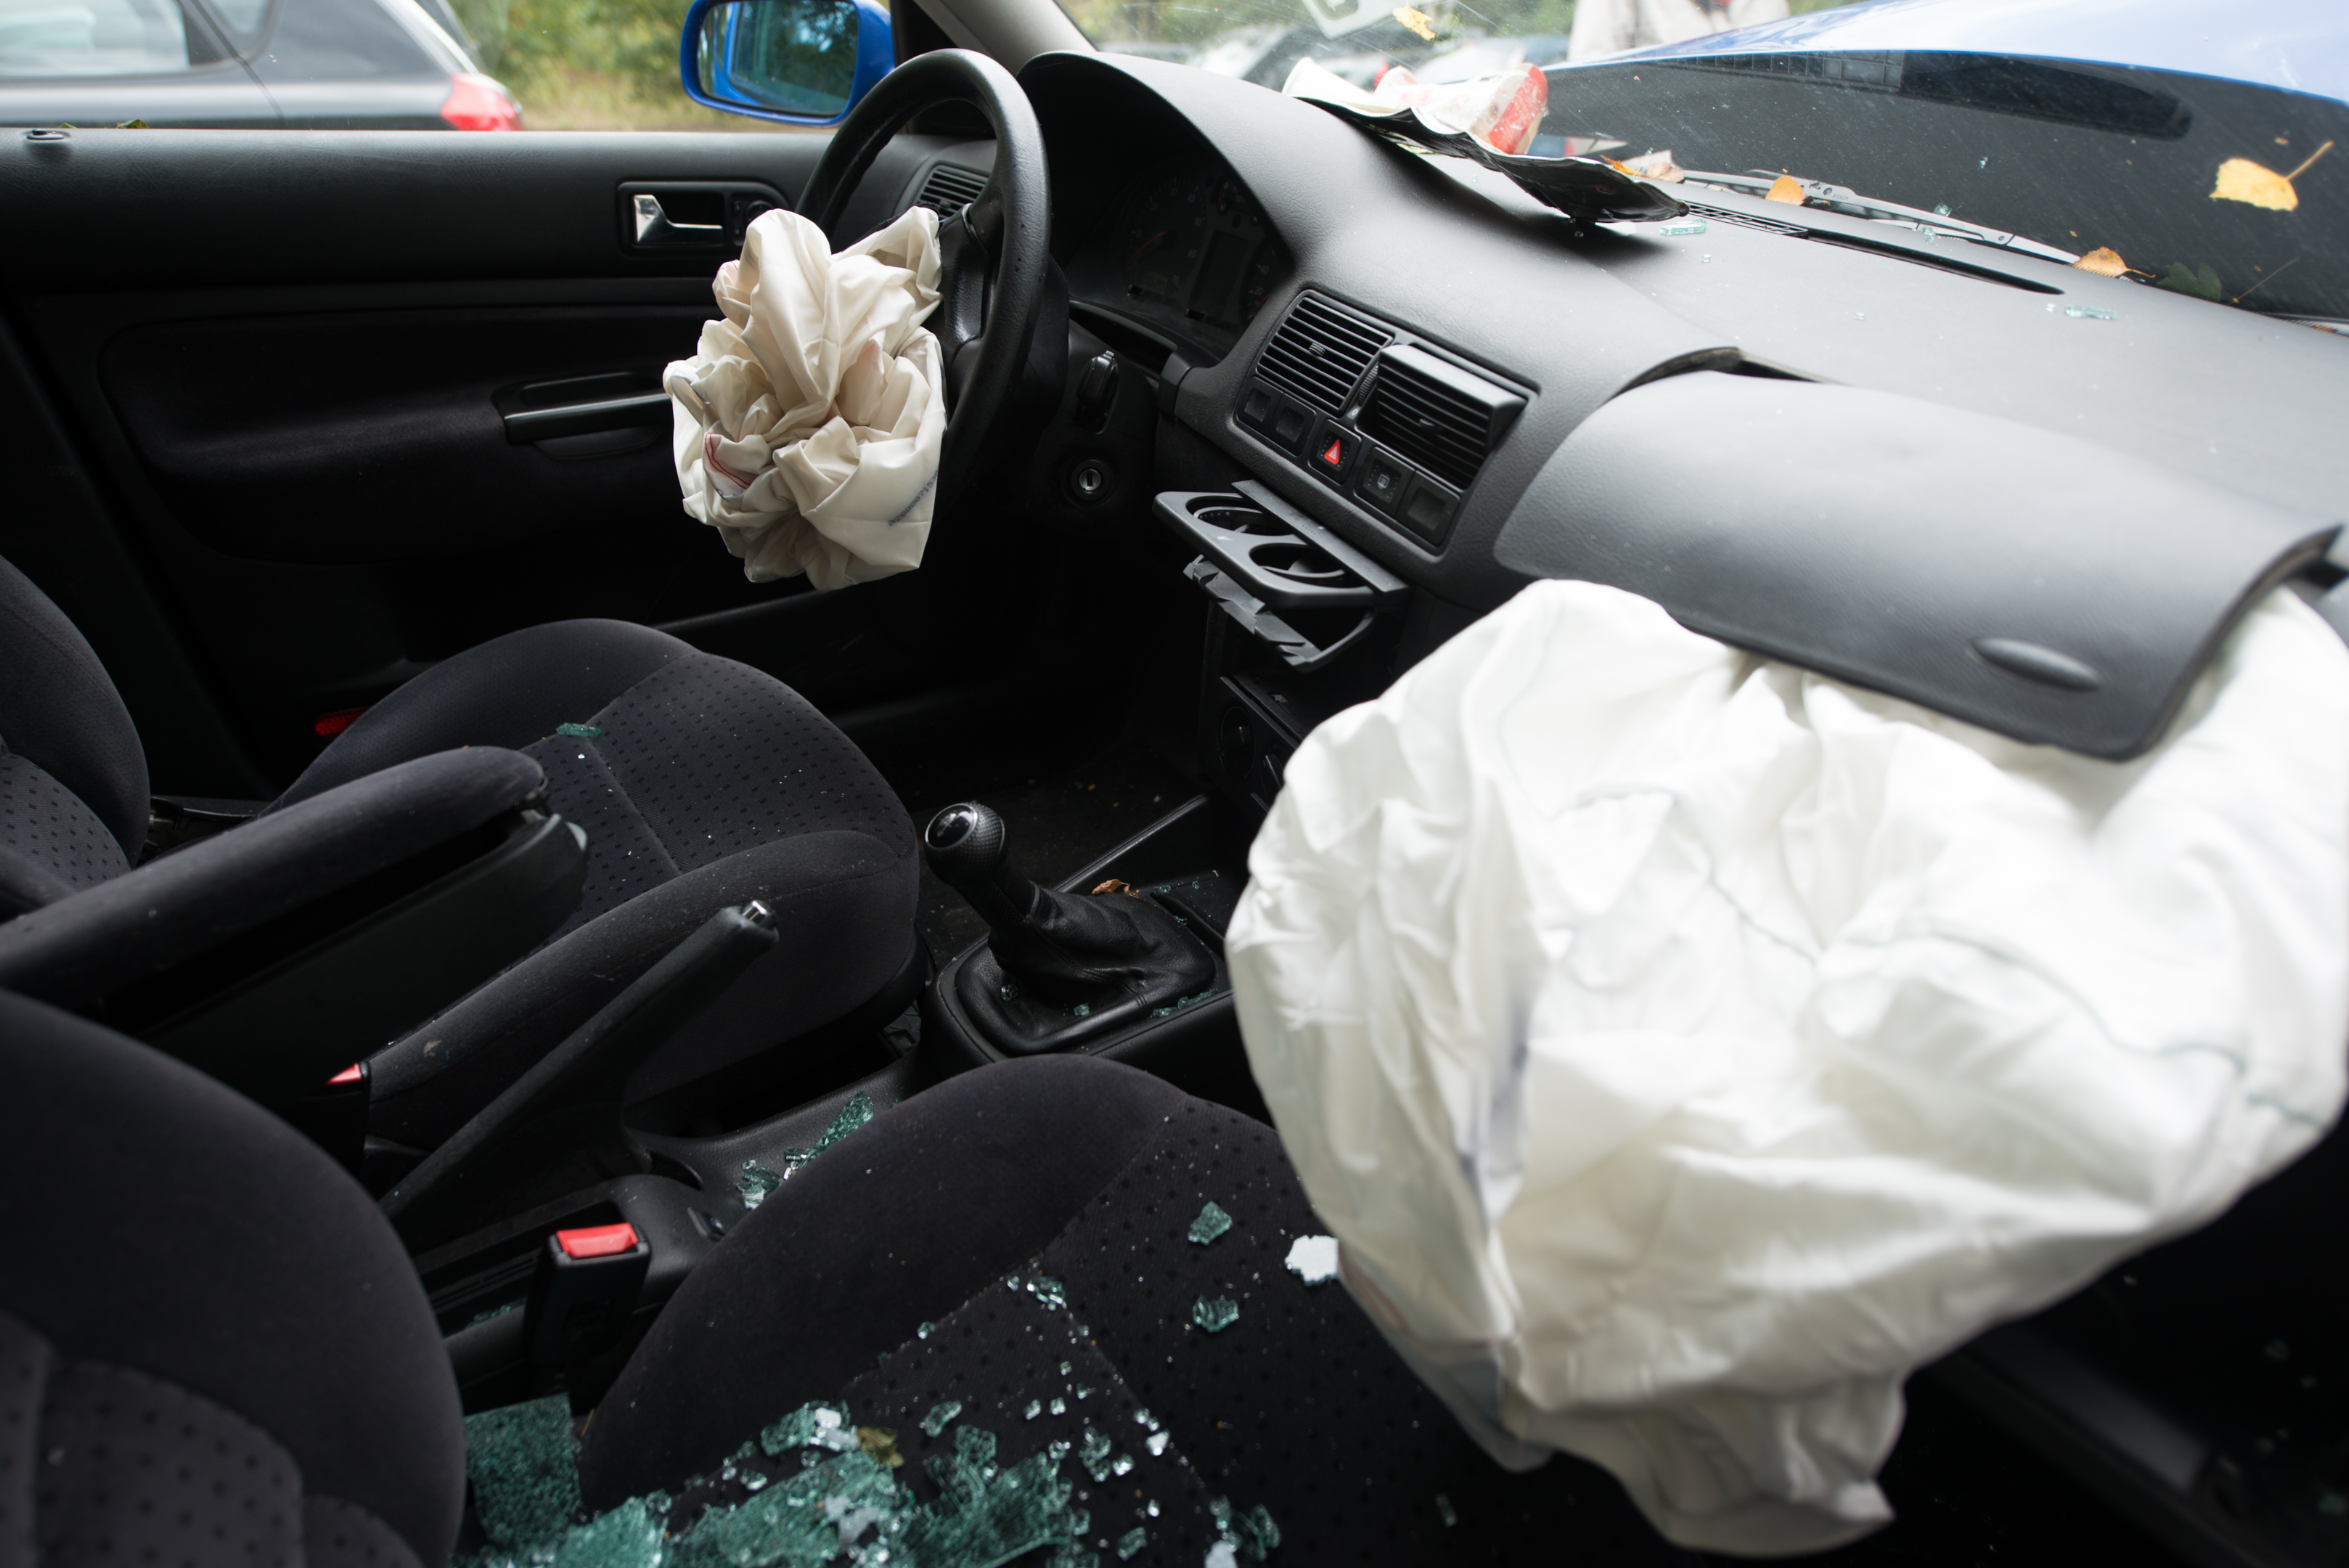 airbags could be an example of defective products